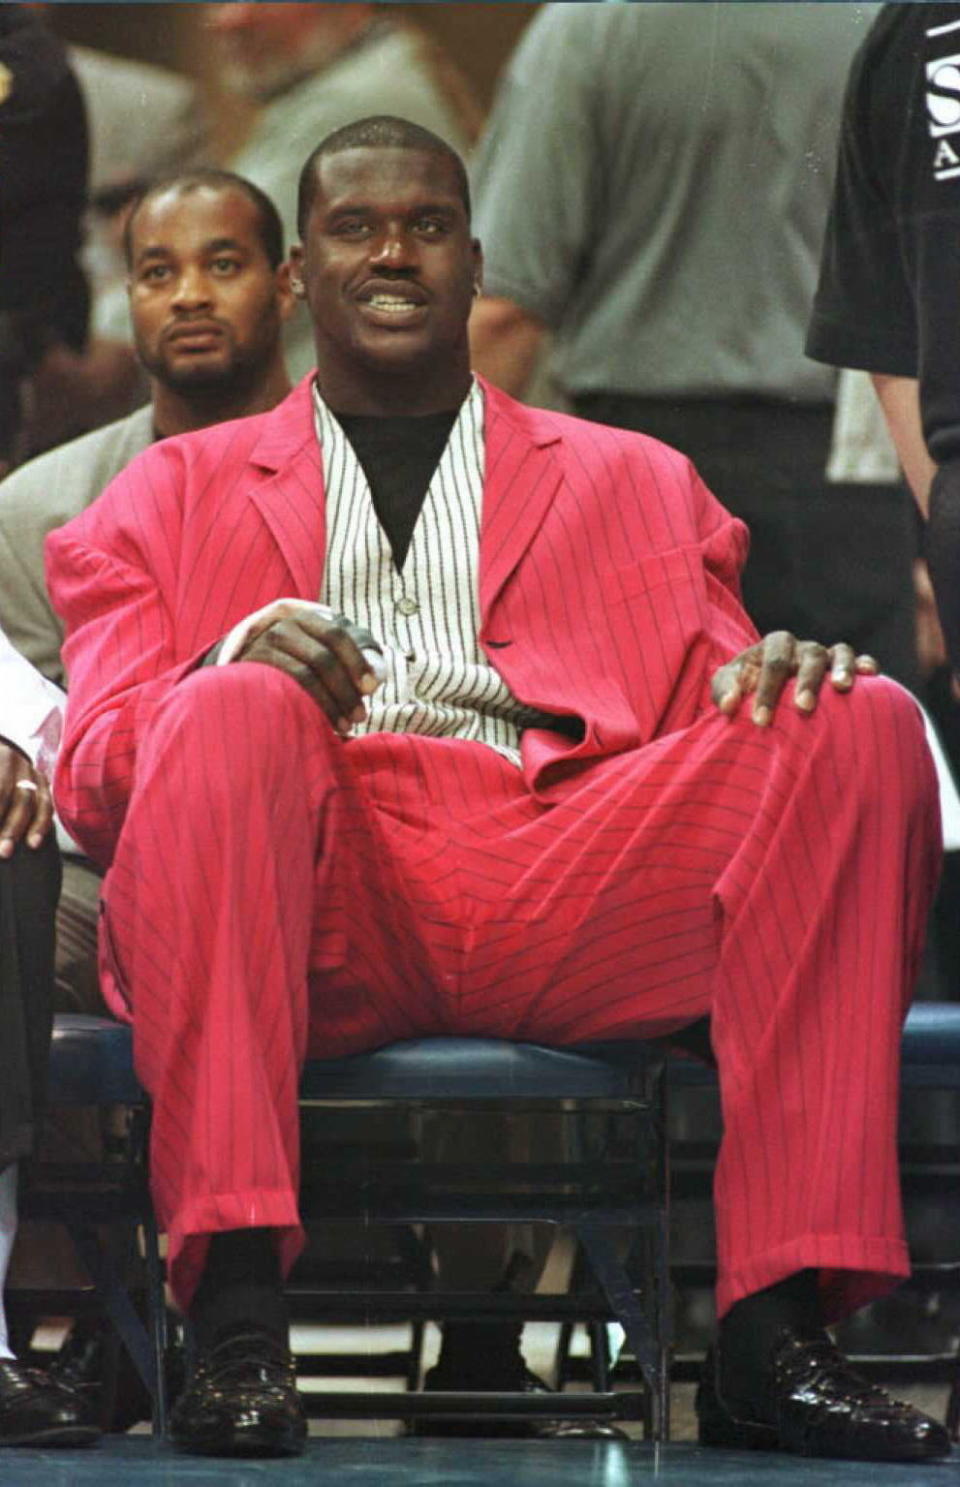 Shaquille O'Neal sits on the bench during the opening game of the Magic's NBA season with the Cleveland Cavaliers at the Orlando Arena. O'Neal was recovering from a broken right thumb sustained during a preseason game with the Miami Heat. (TONY RANZE/AFP/Getty Images)